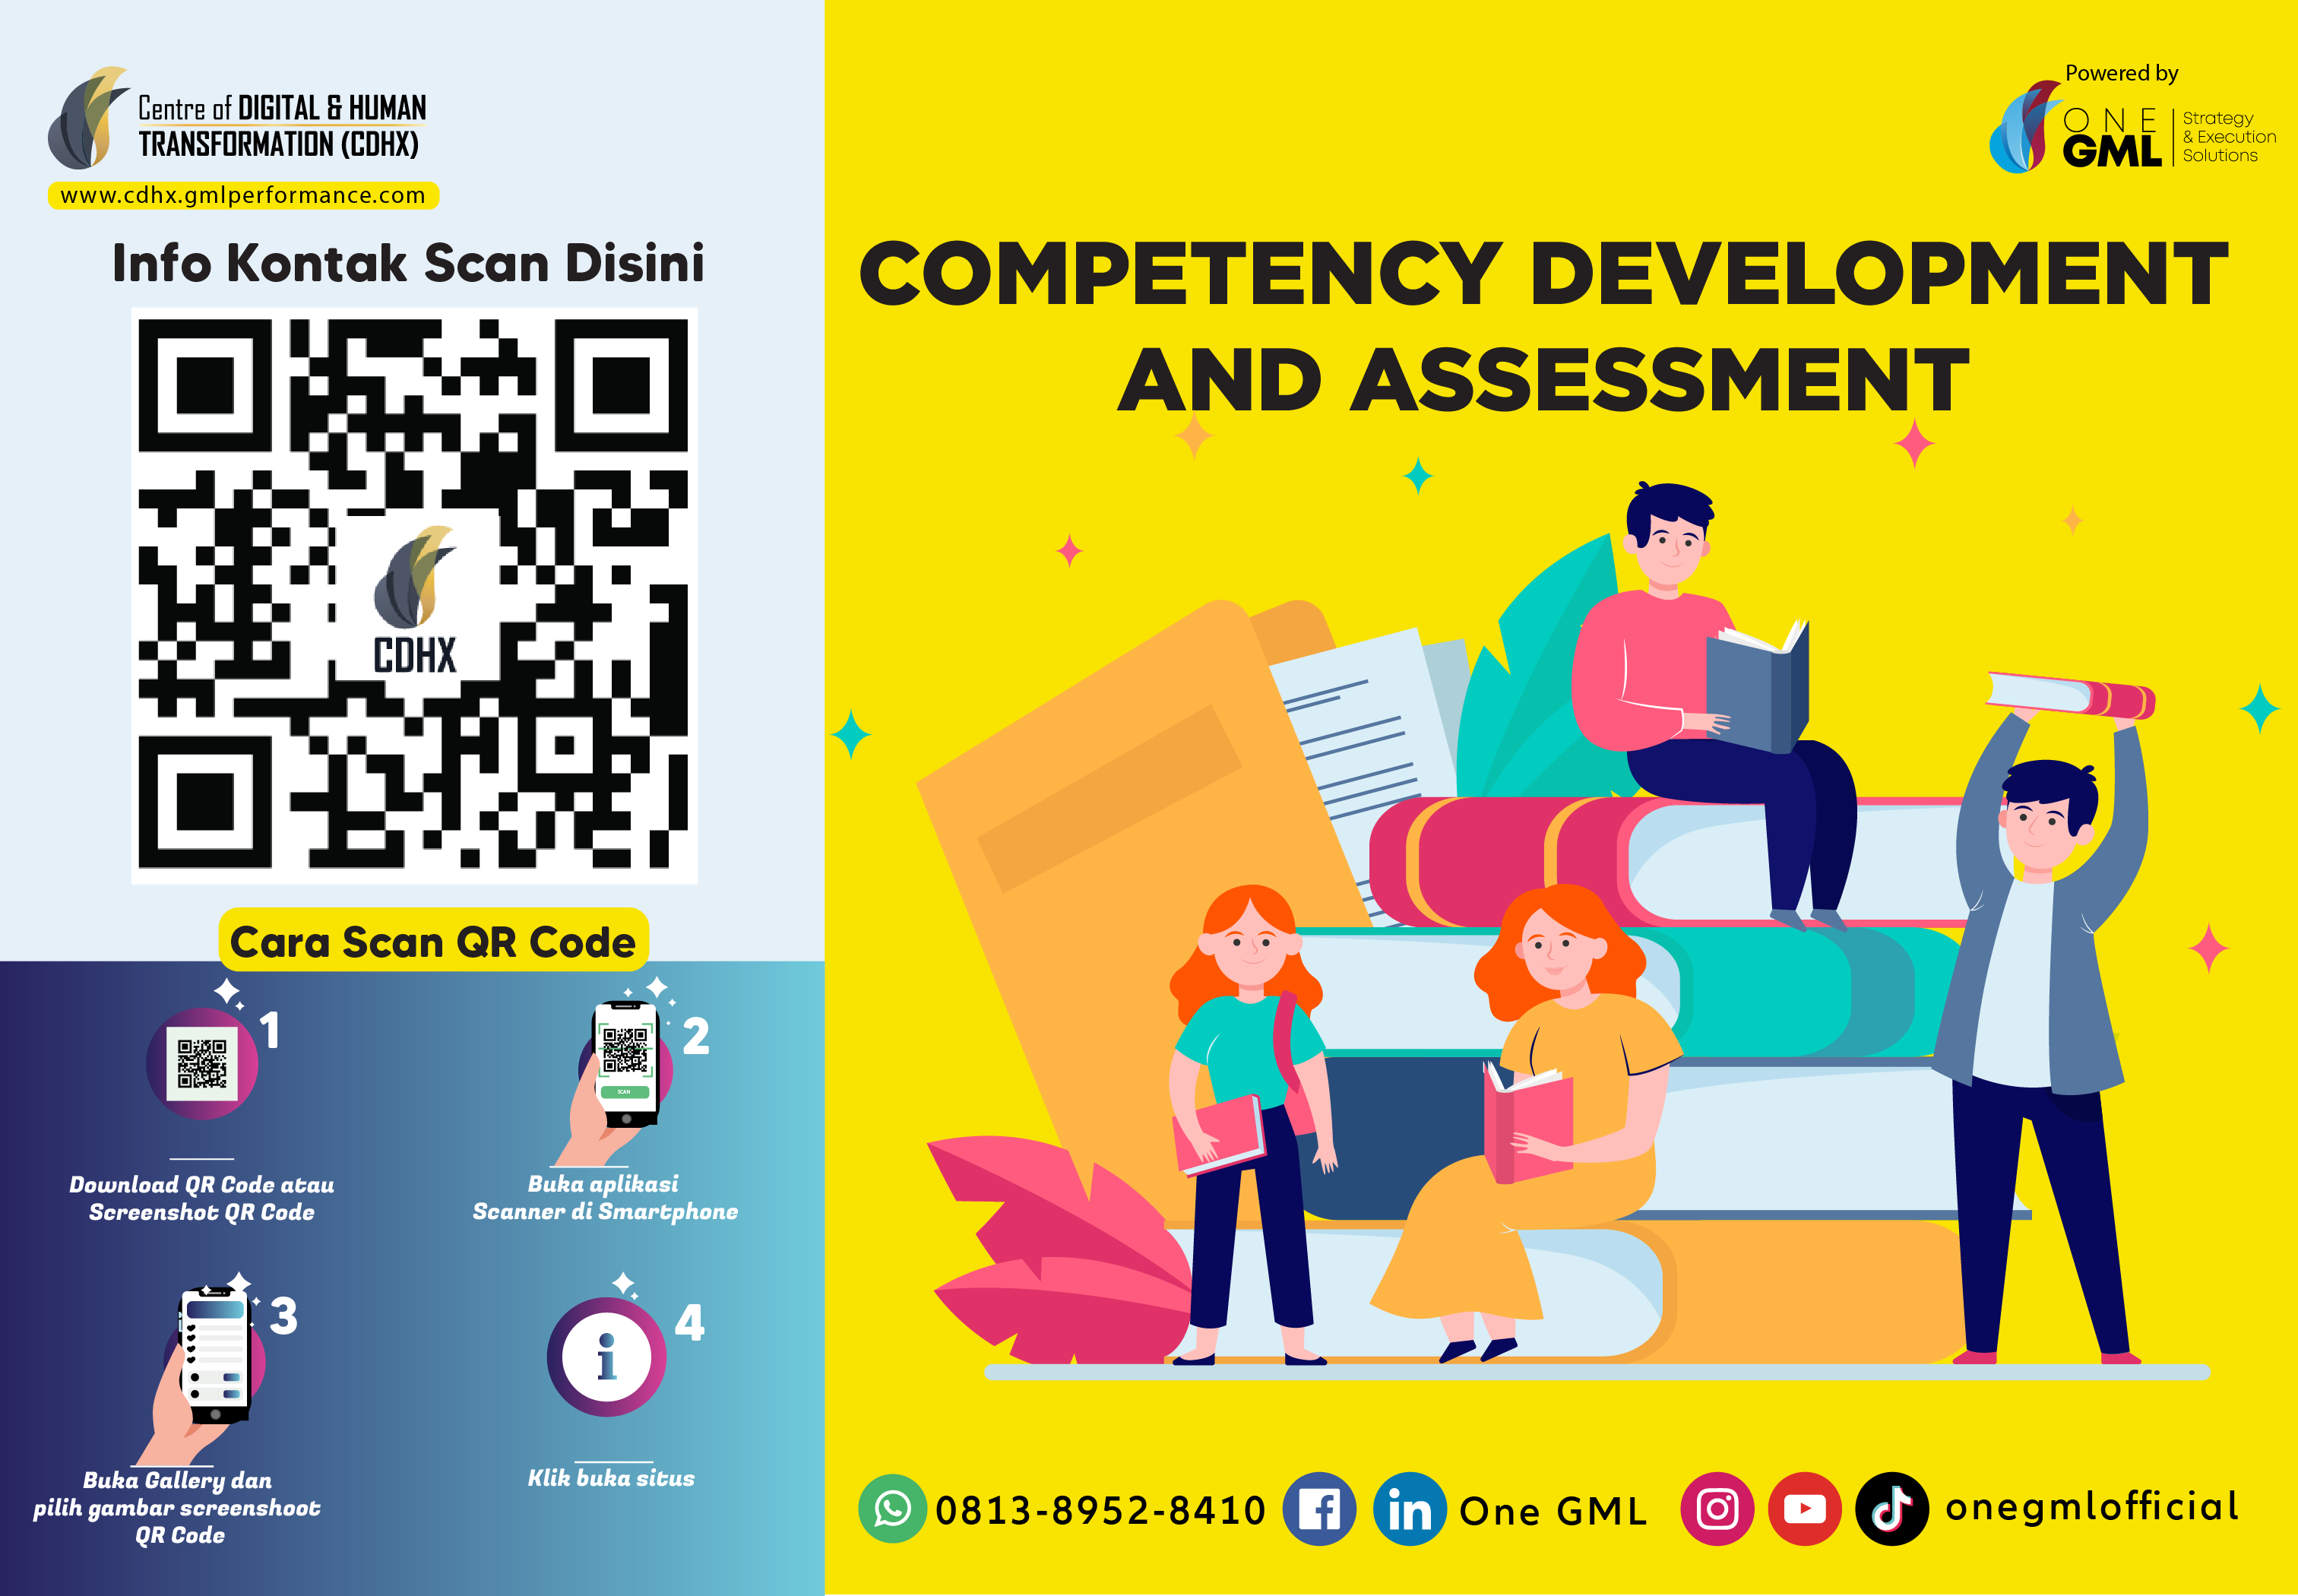 Competency Development and Assessment